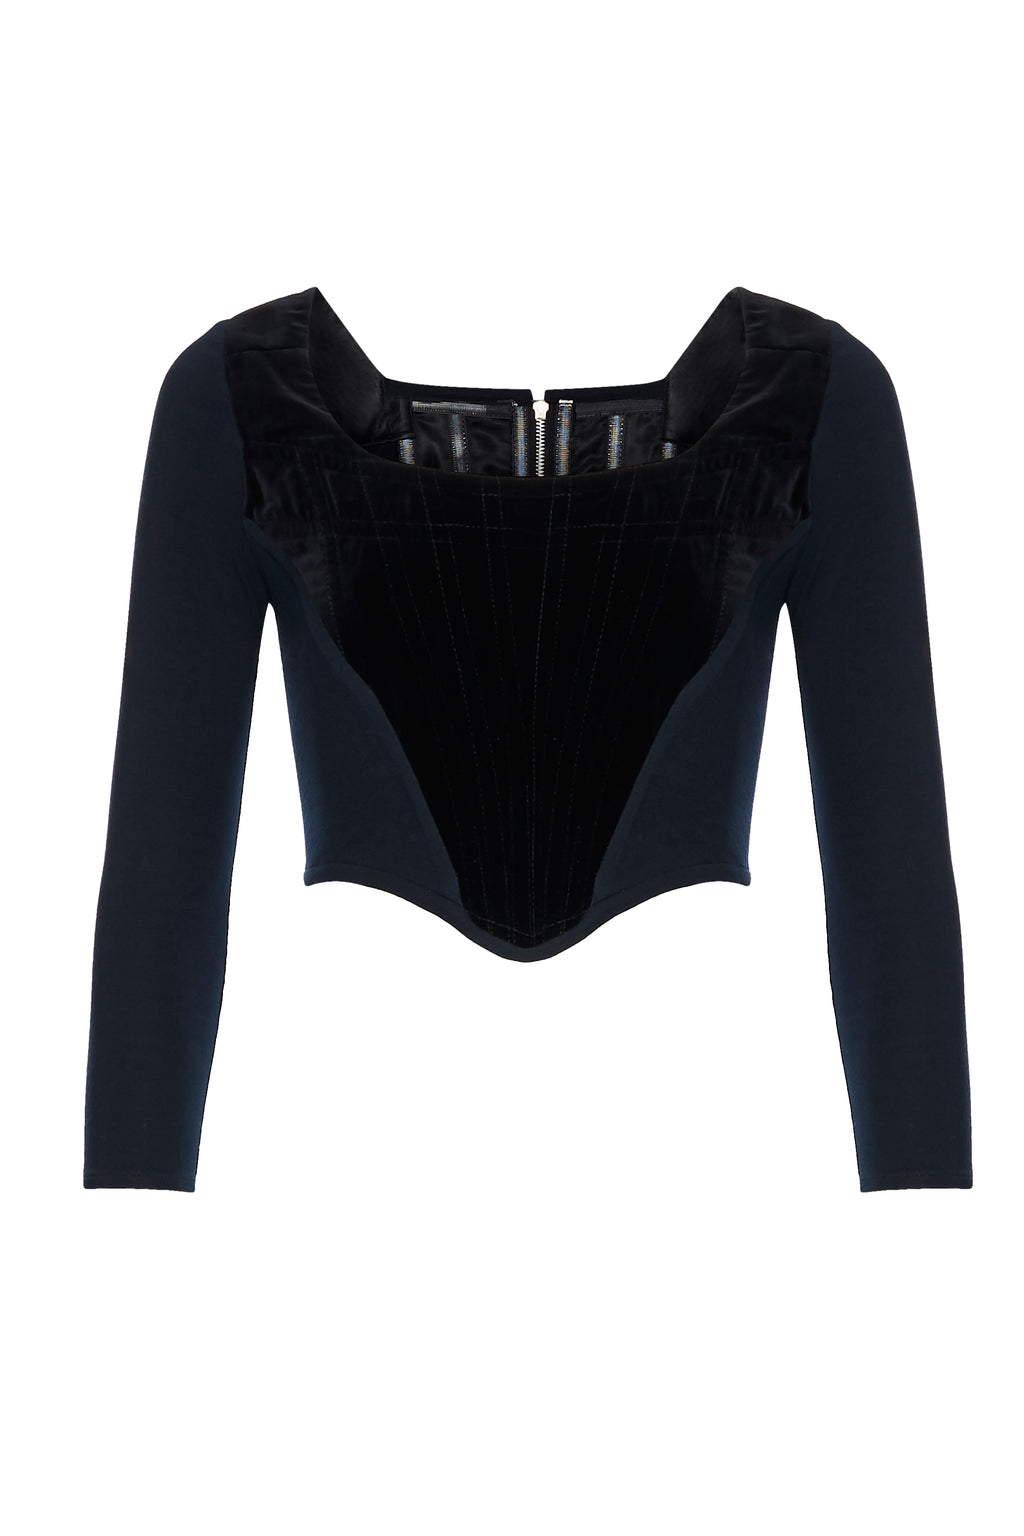 1990s Vivienne Westwood Black Velvet and Jersey Long Sleeved Corset. Rent: £155/Day